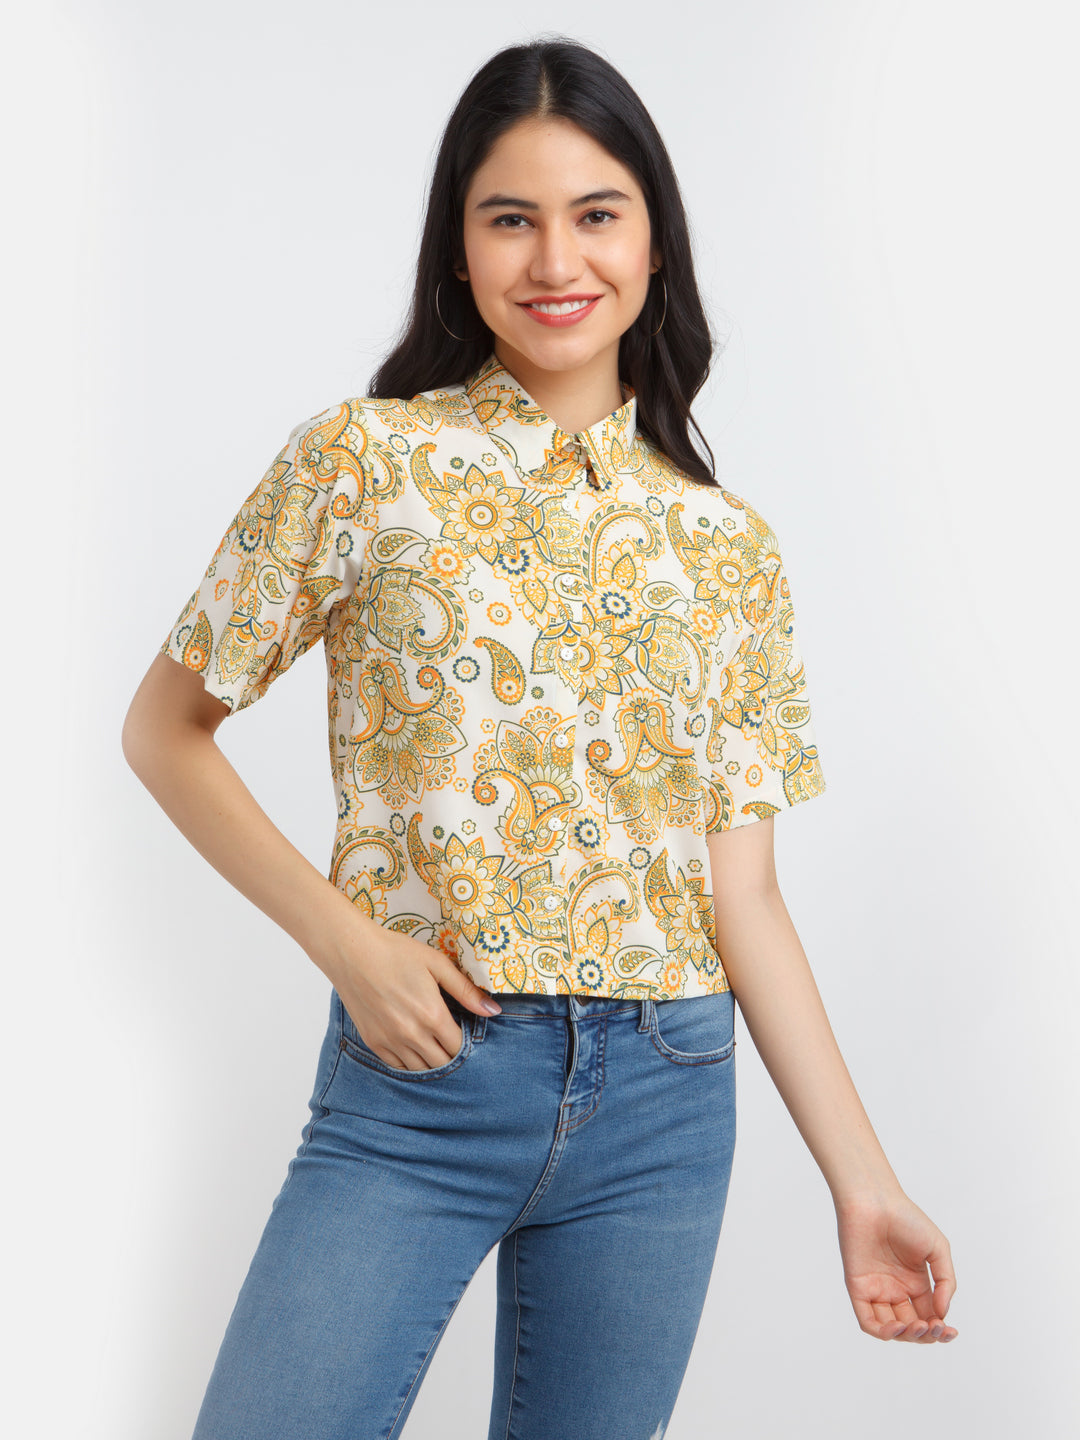 Multicolored Printed shirt For Women